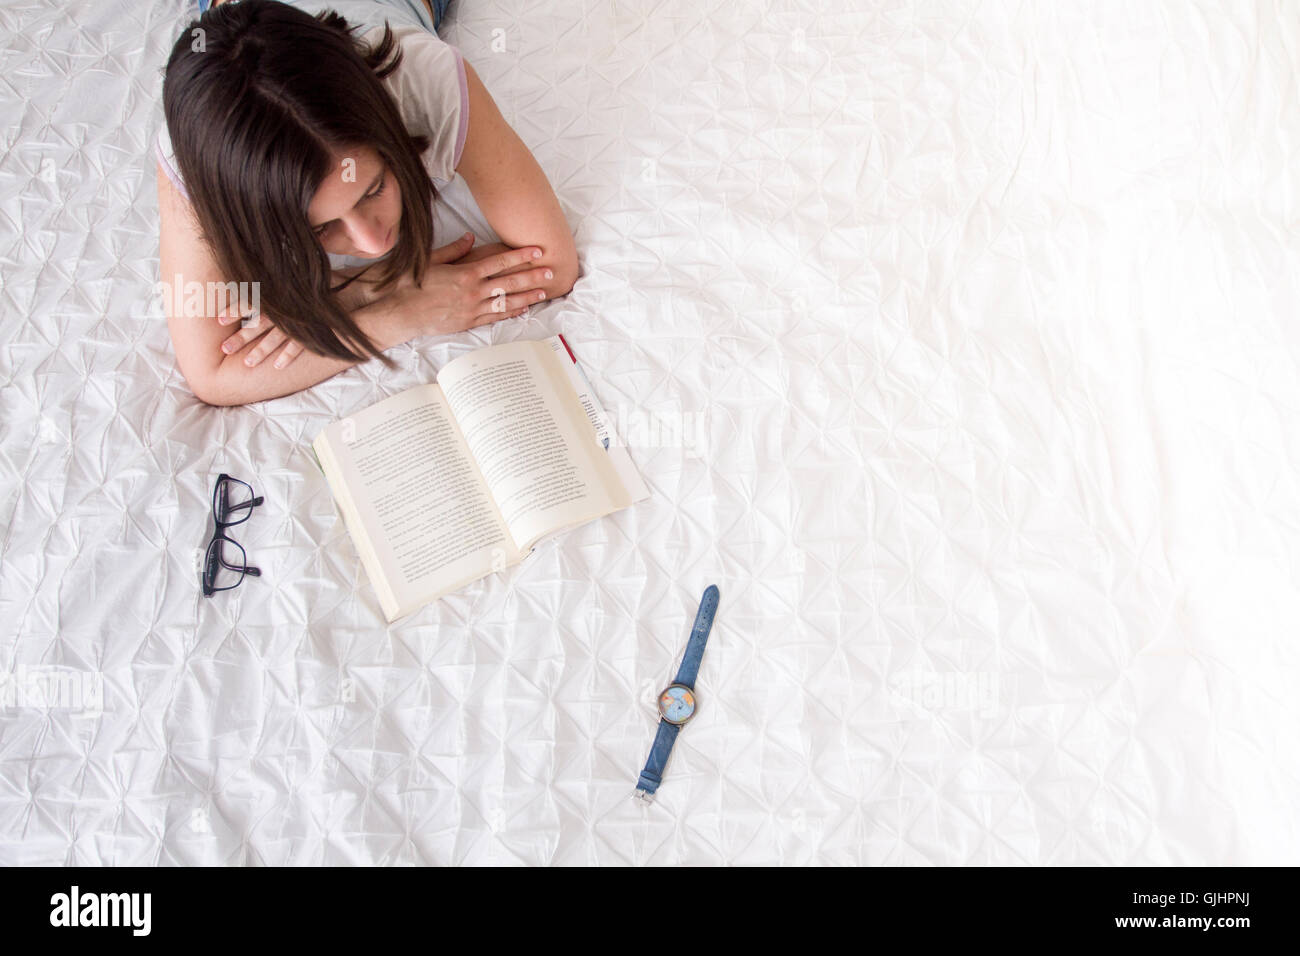 Girl reading a book on her bed Stock Photo